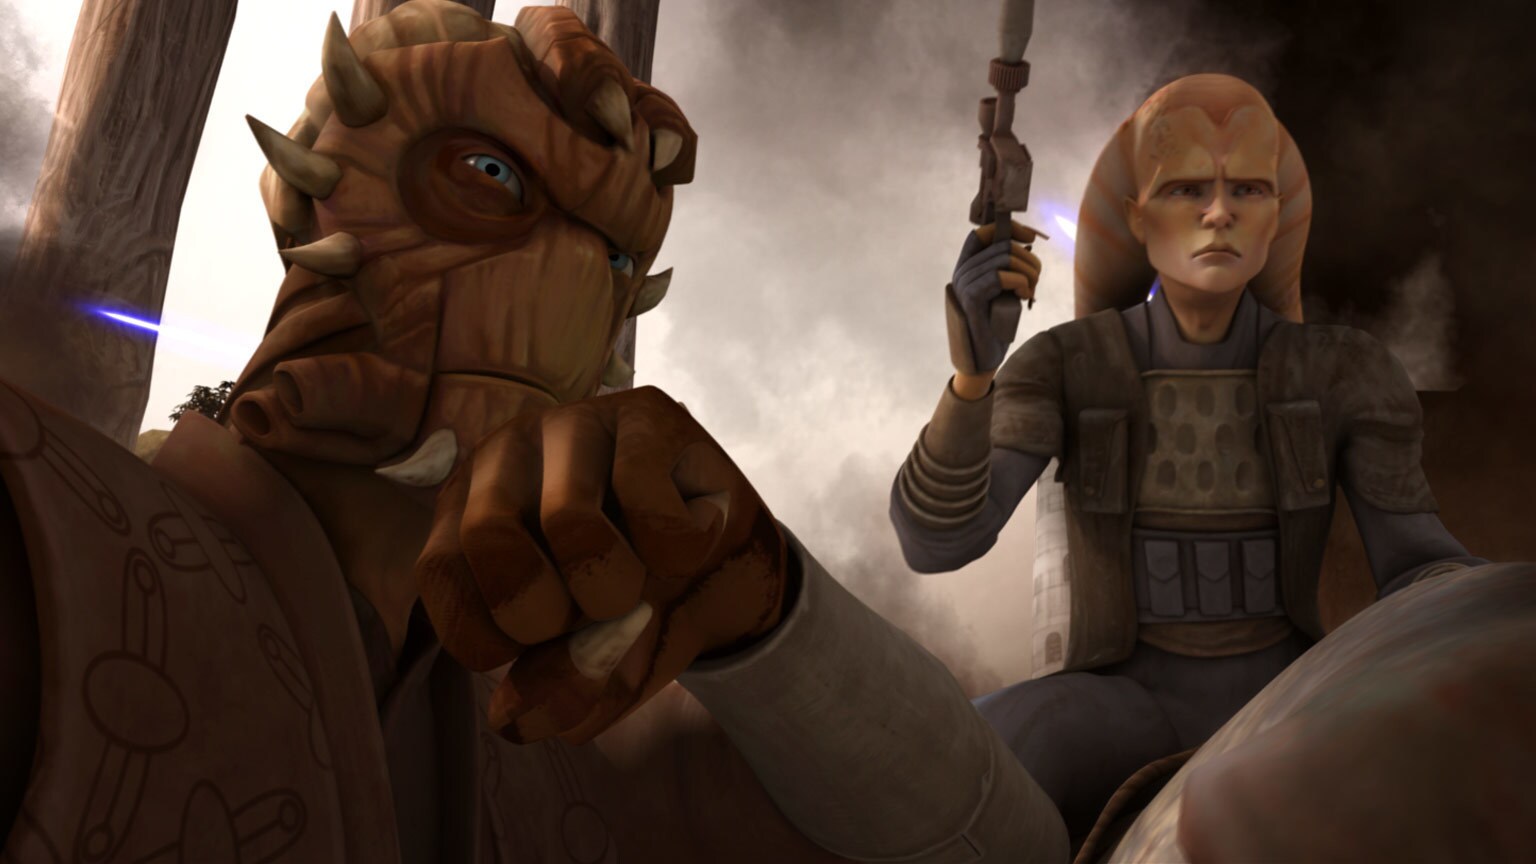 The Clone Wars Rewatch: Ryloth Caught in the Crossfire in "Supply Lines"